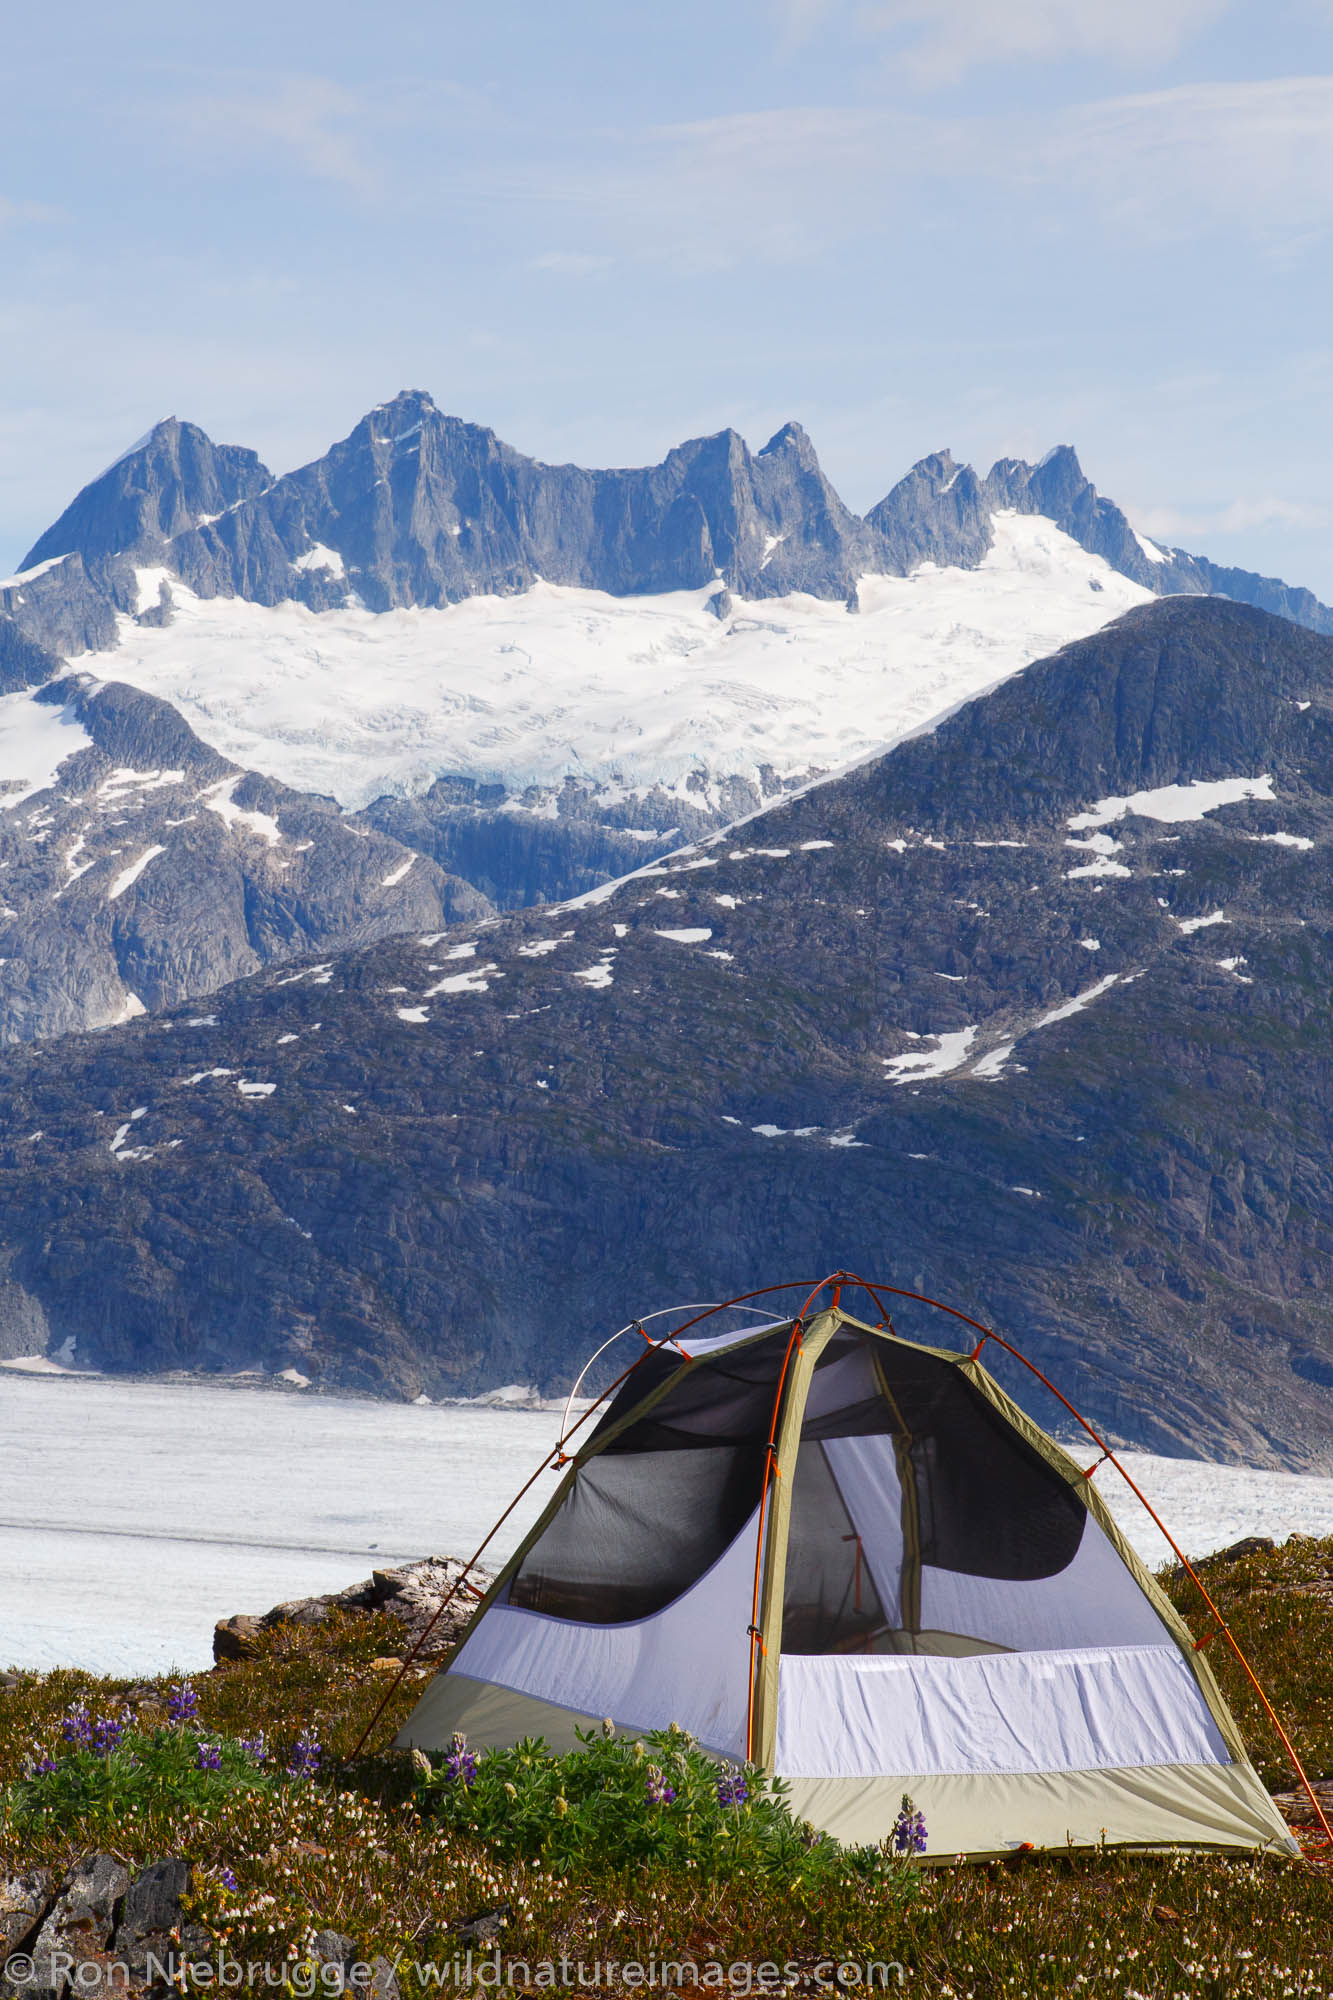 Camping on Mount Stroller White above the Mendenhall Glacier, Tongass National Forest, Alaska.